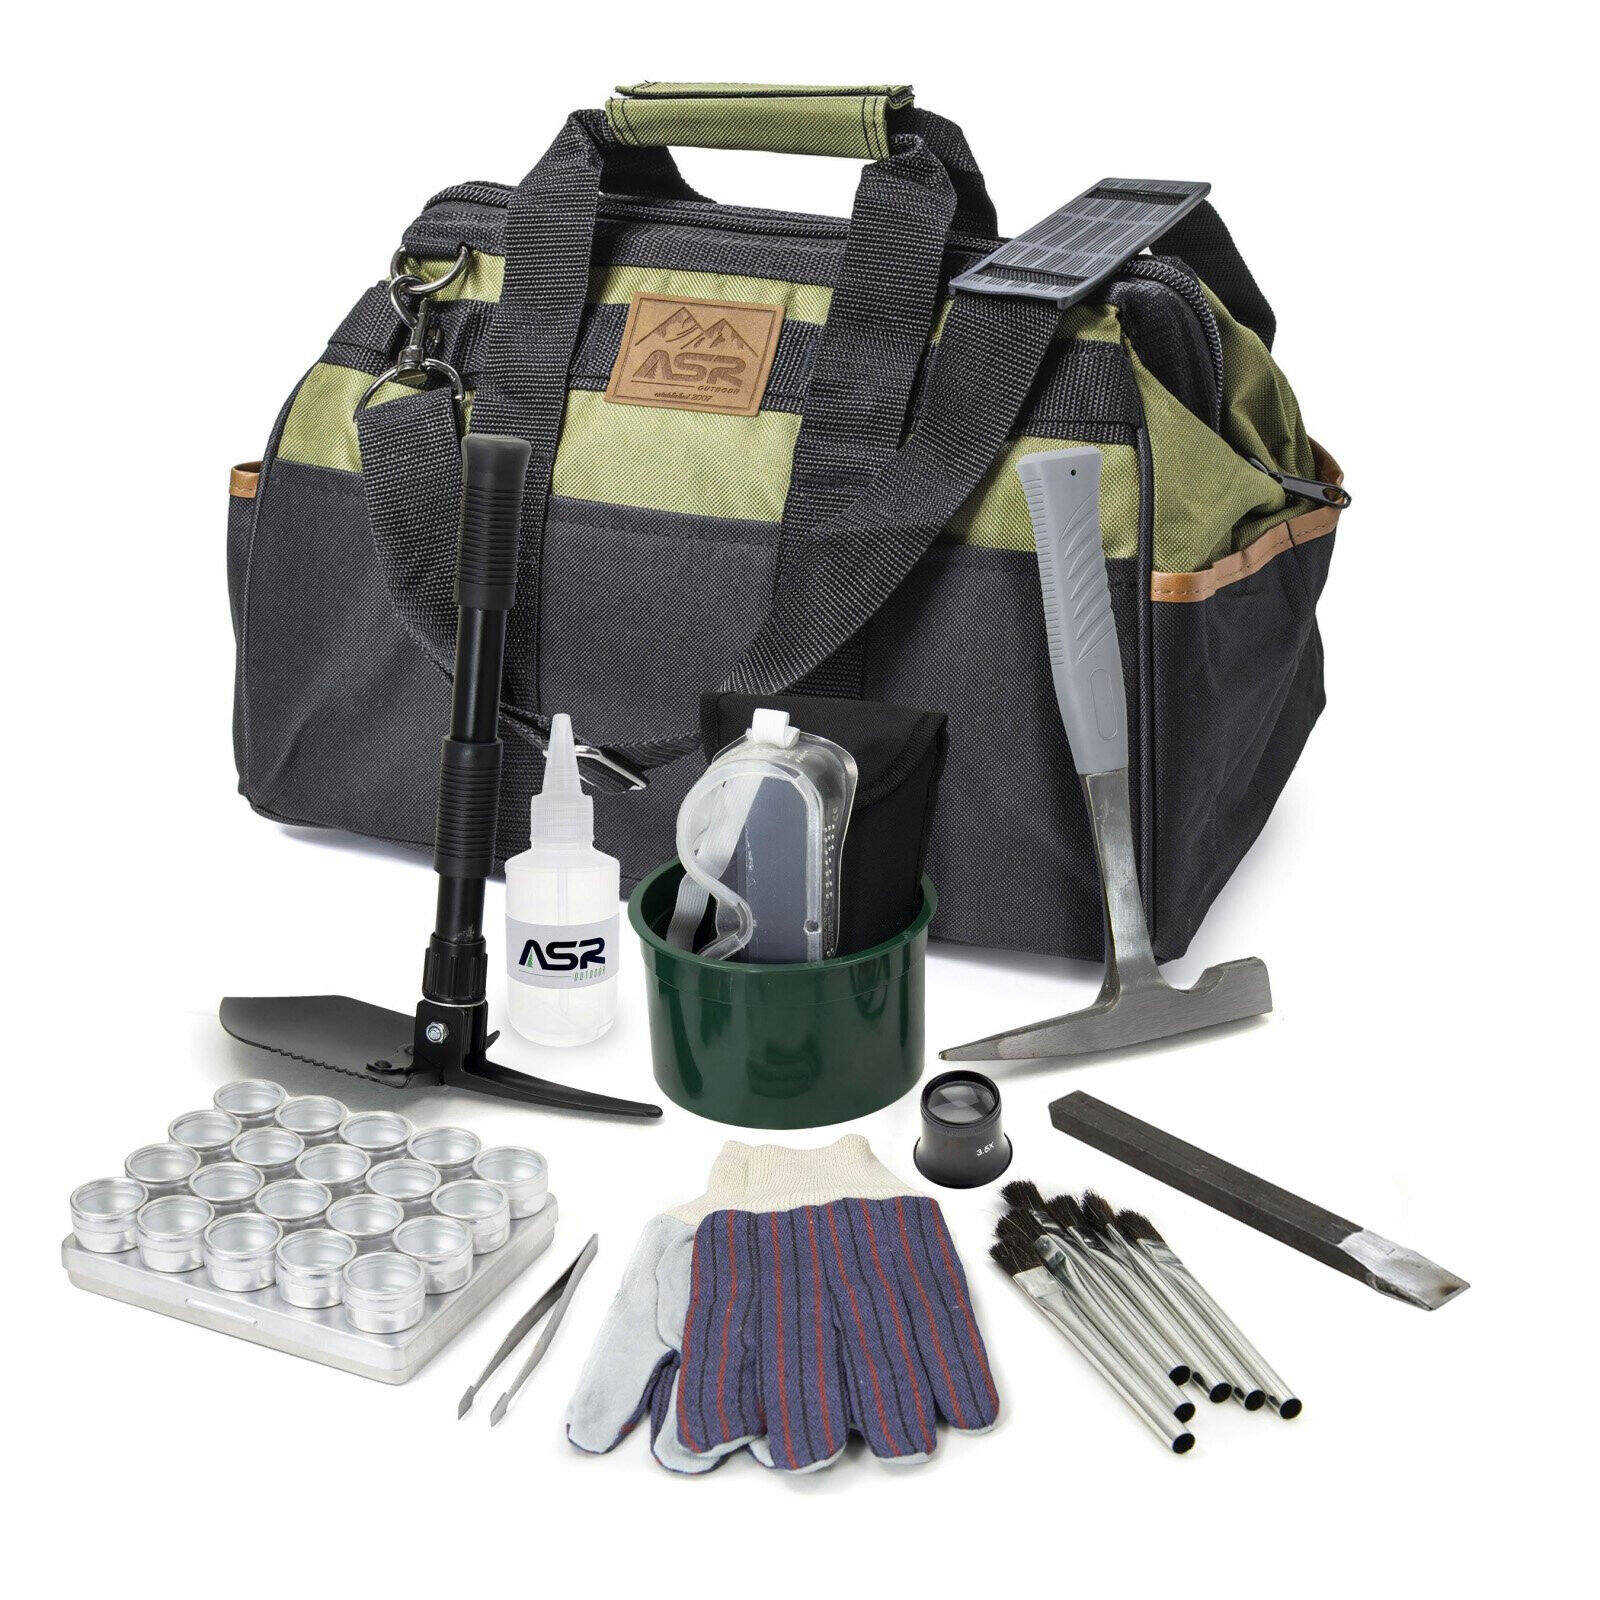 ASR Outdoor 13pc Beginner Geology Rock Hounding Kit with Mining Tools and Carry